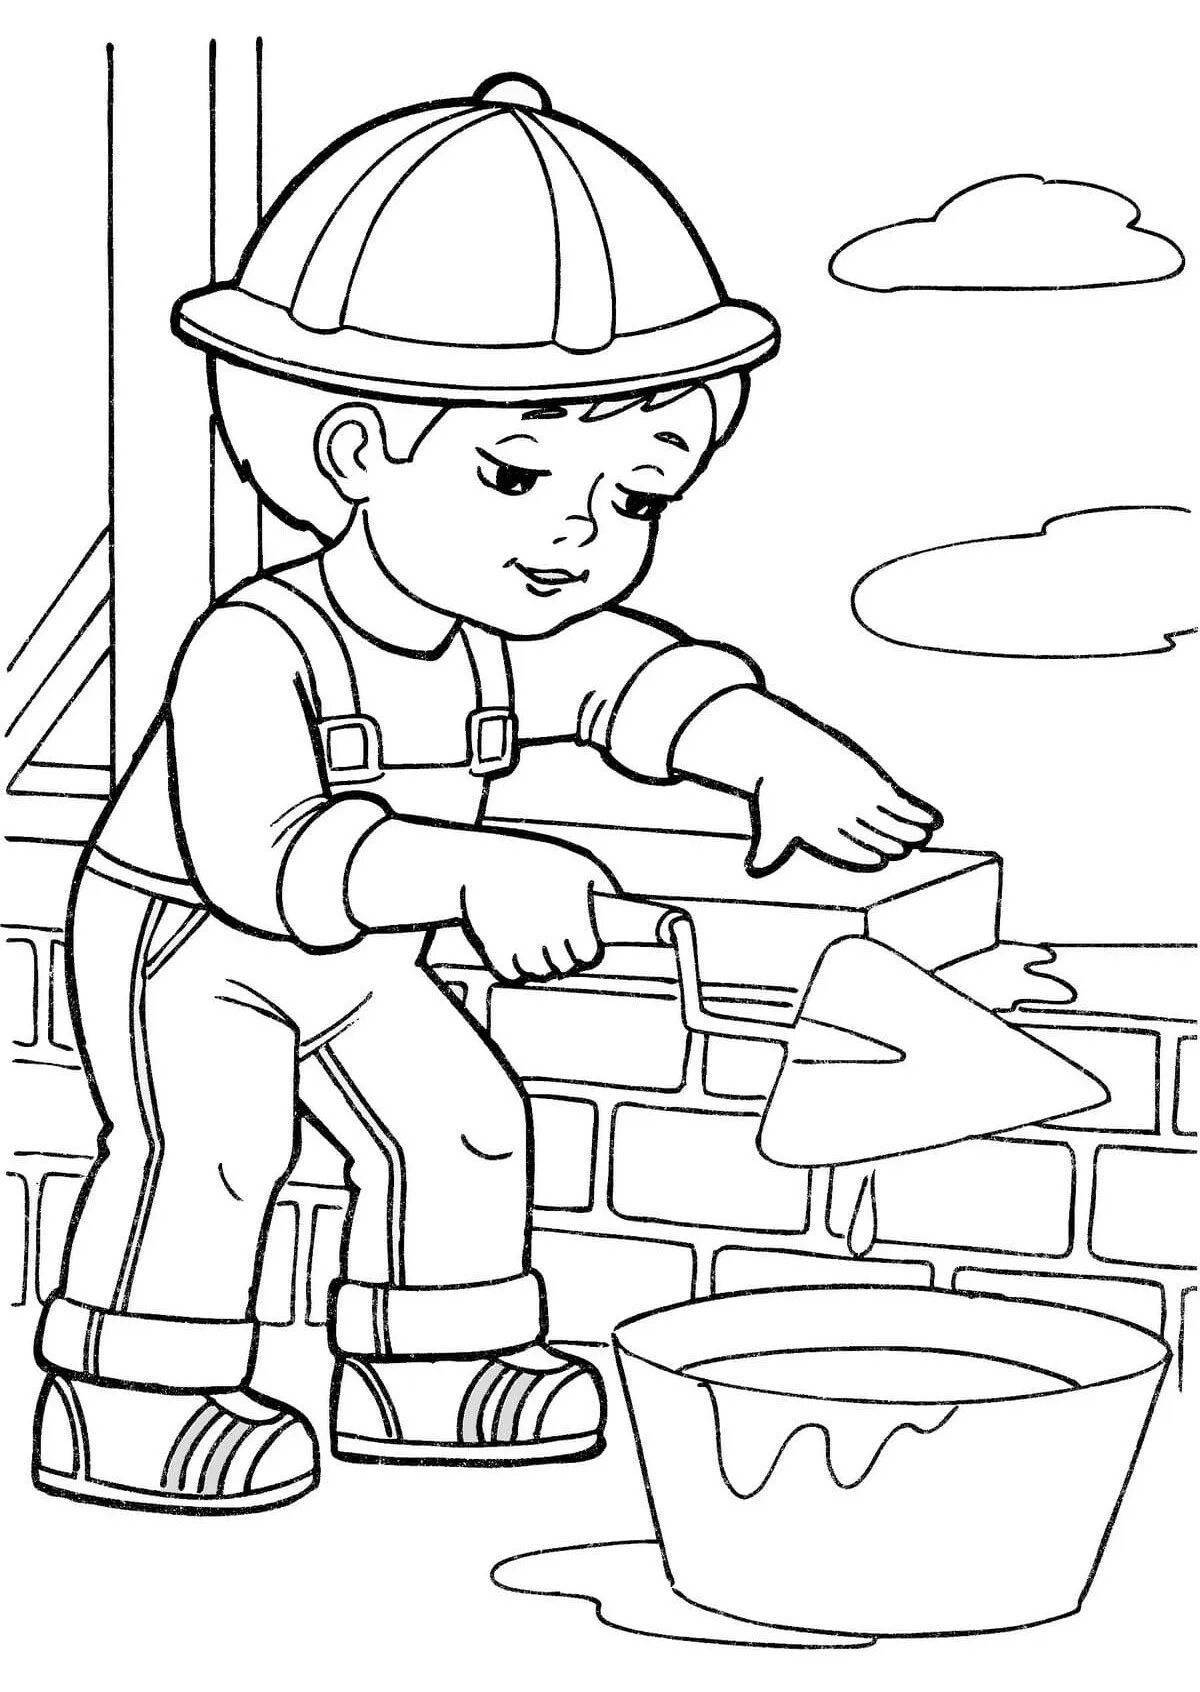 Coloring page cheerful journalist